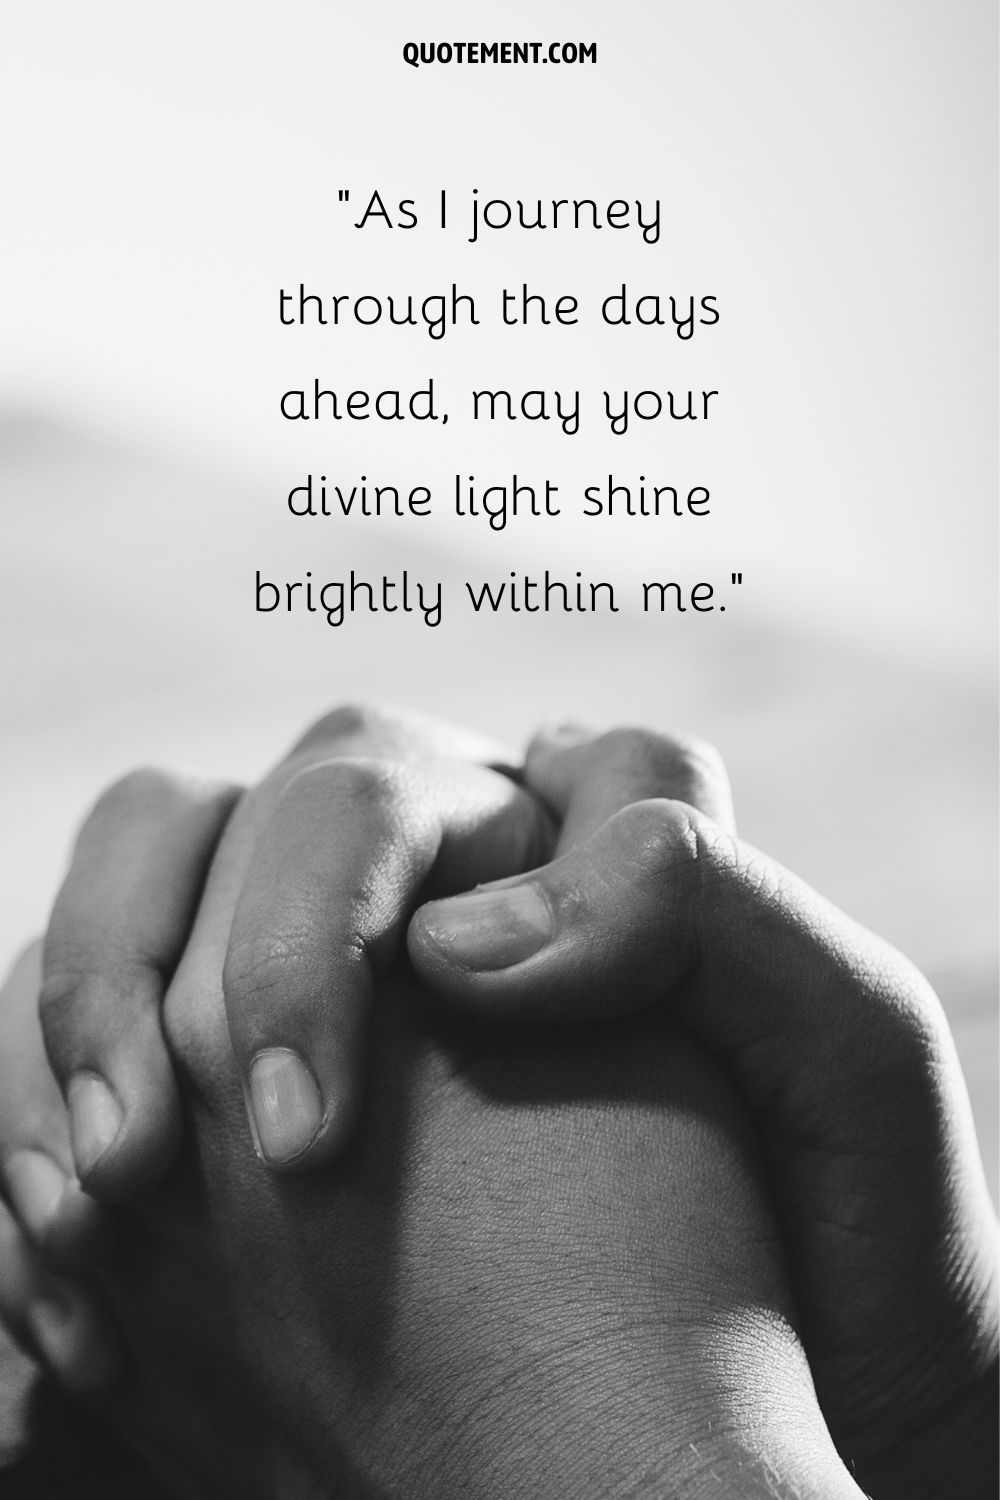 As I journey through the days ahead, may your divine light shine brightly within me